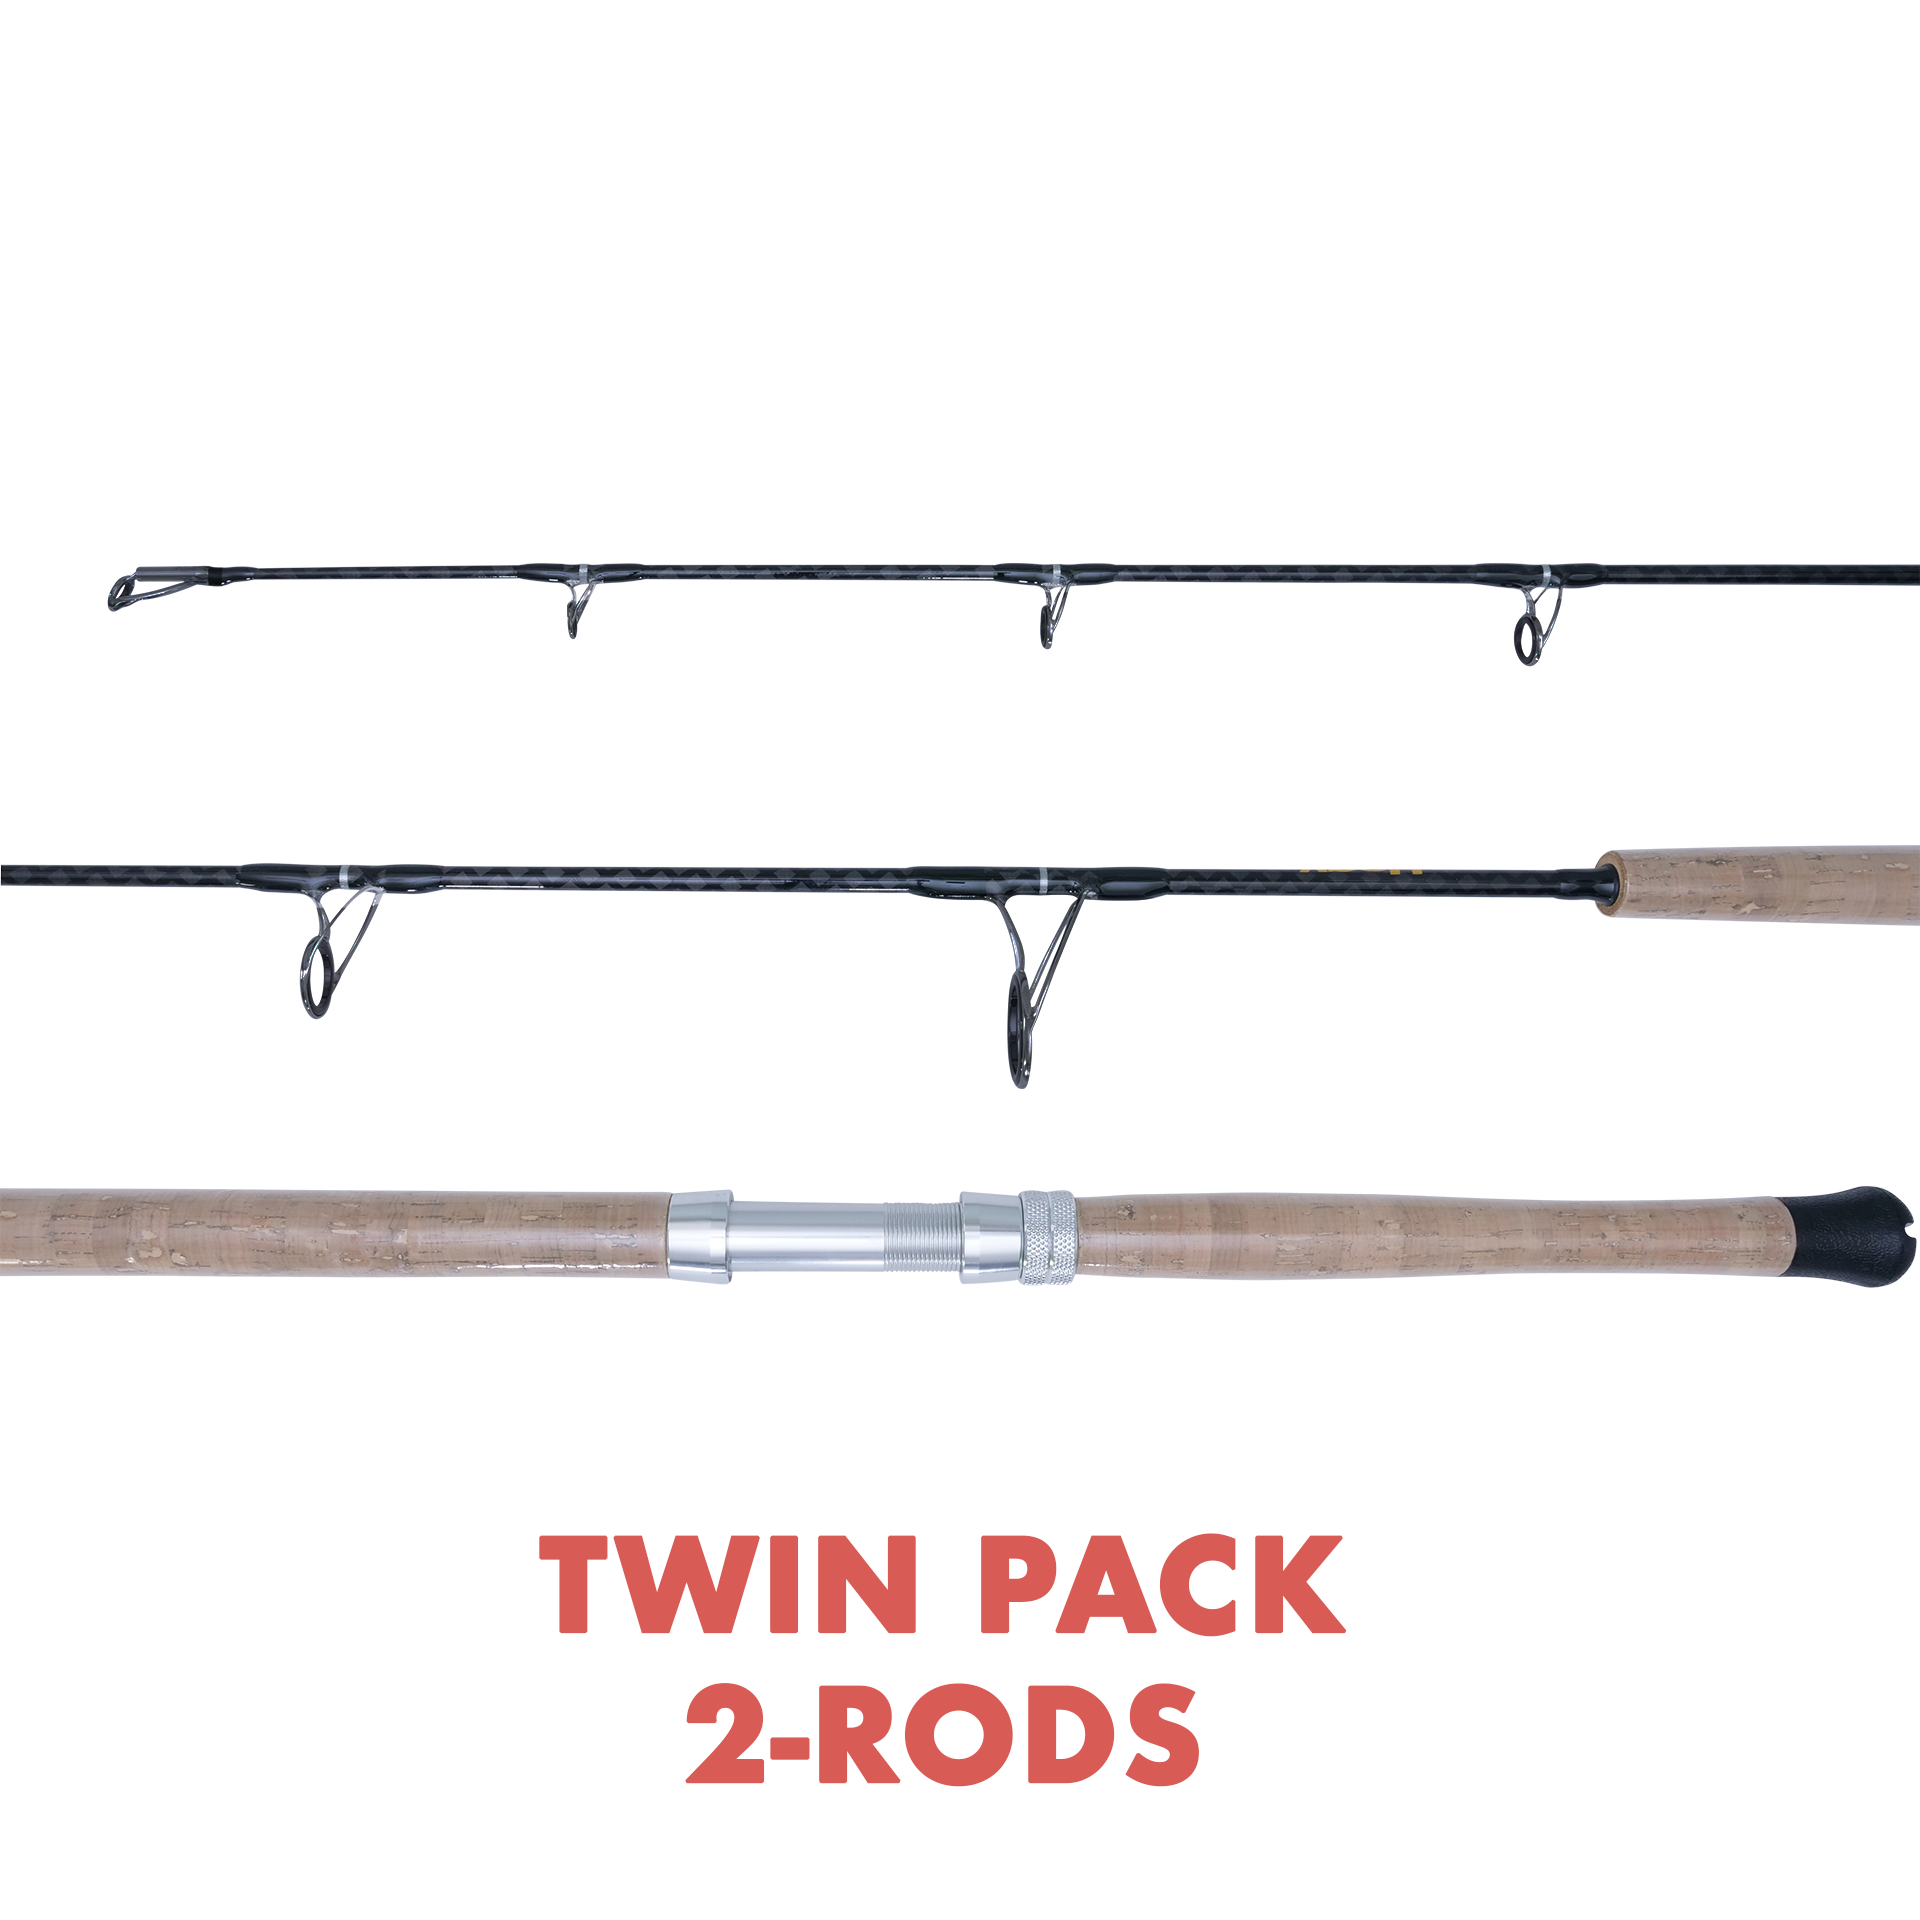 TWIN PACK Tuna Jigging Spinning Rod: Mod-Fast Action 5' 9" MH (4oz - 16oz)